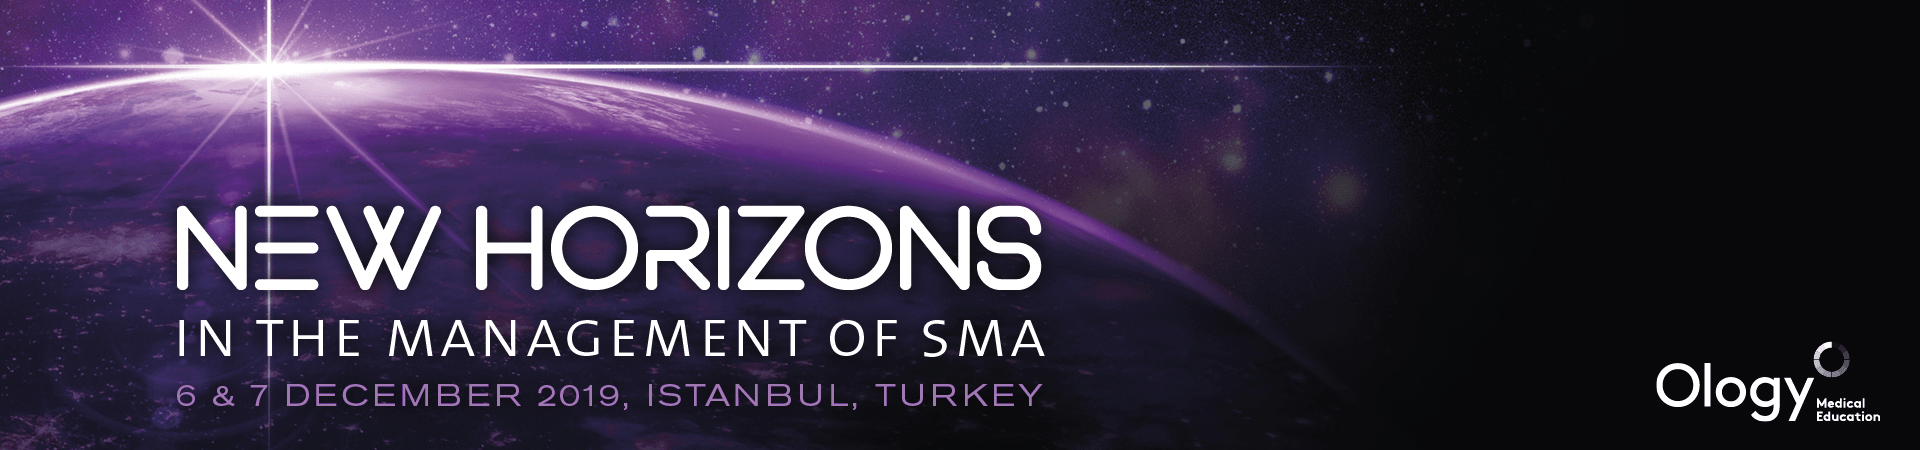 New horizons in the management of SMA